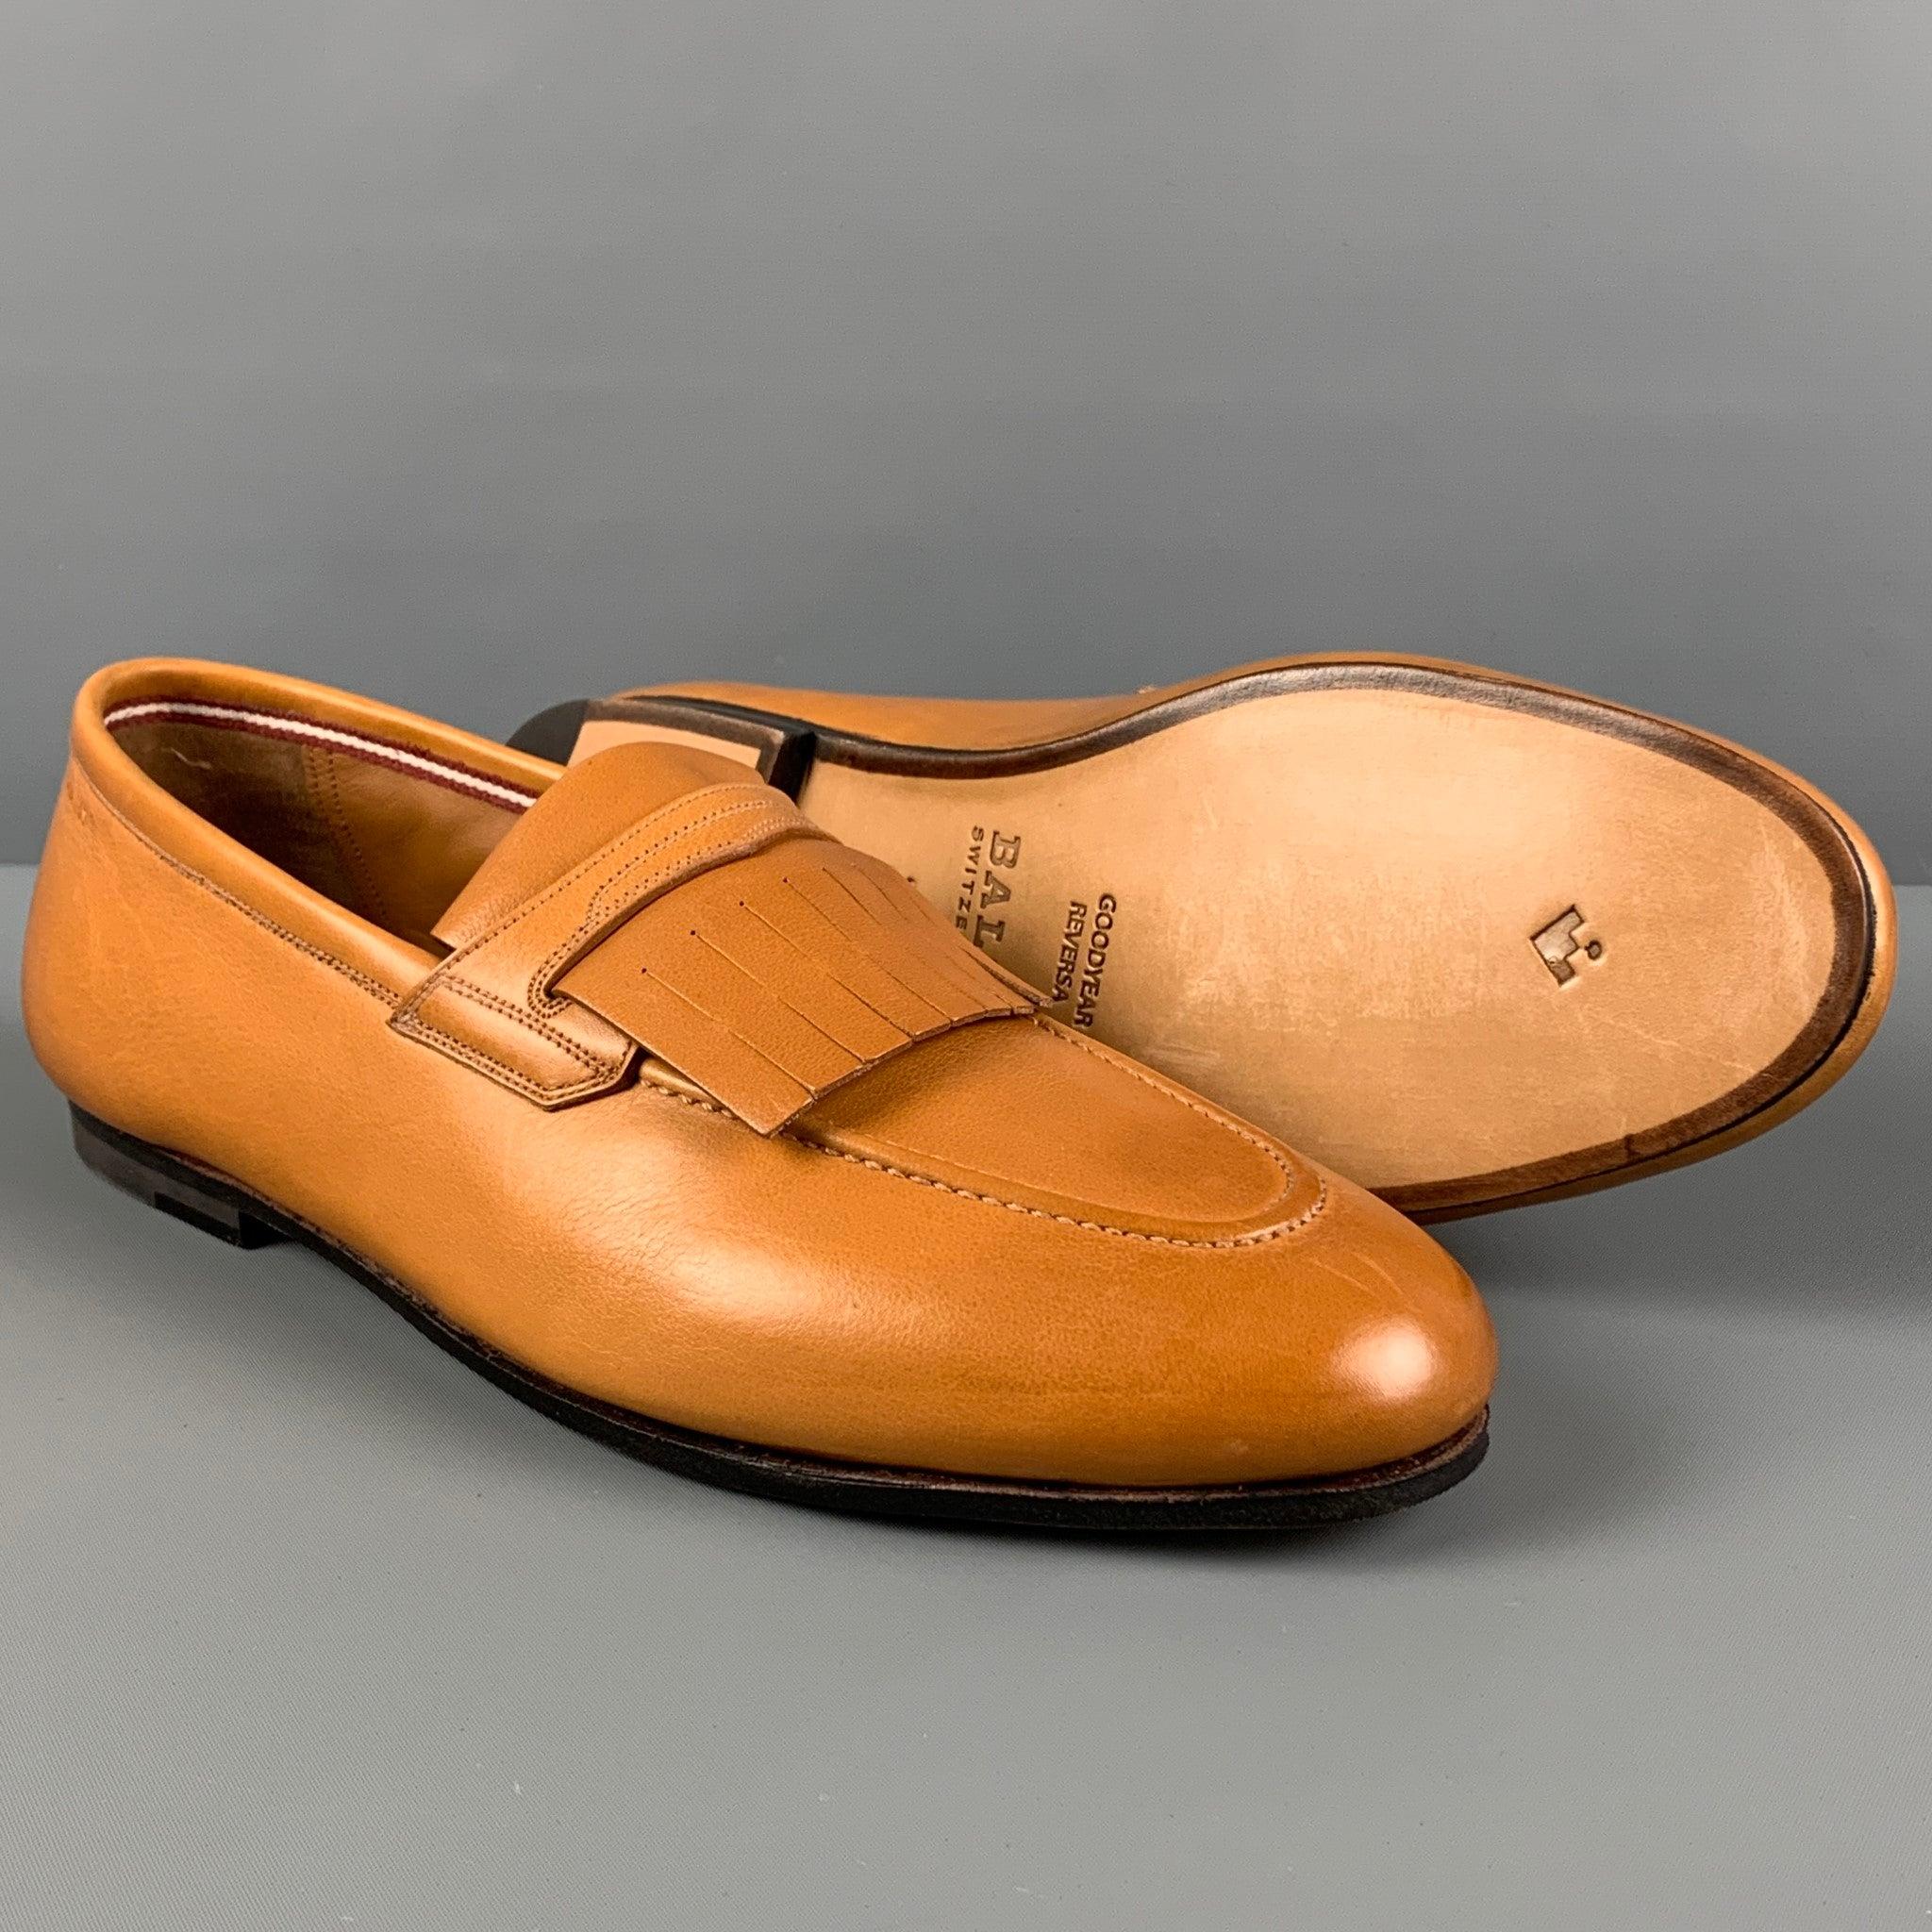 BALLY Size 7.5 Honey Leather Slip On Loafers In Good Condition For Sale In San Francisco, CA